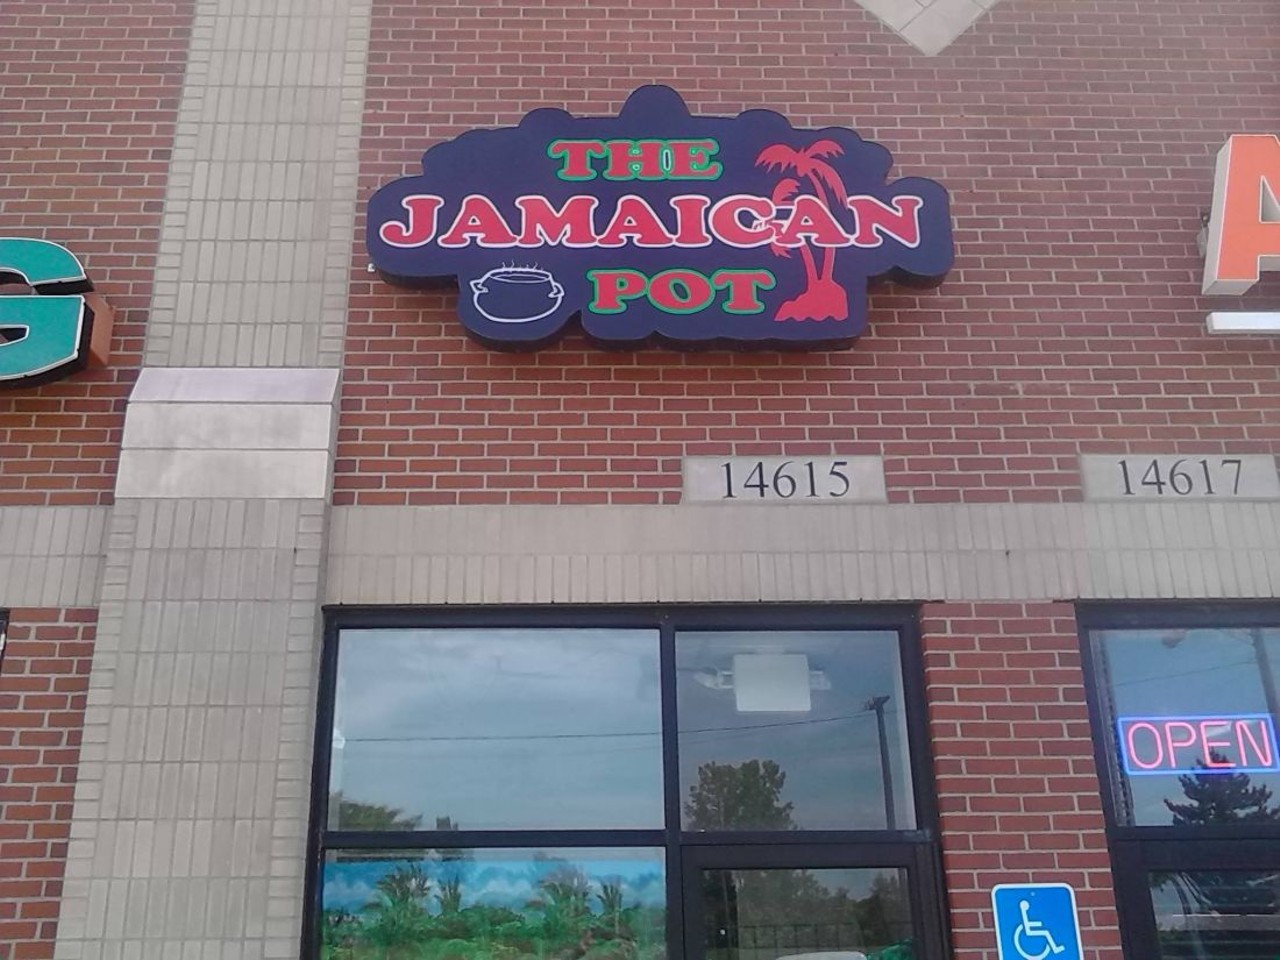 The Jamaican Pot
14615 Eight Mile Rd., Detroit
The Jamacian Pot is one of the best spots to get Jamacian food in Detroit. The story goes that one day Bruce Forrest, the owner, along with his wife Rose, had brought some homemade jerk chicken to work, and someone smelled the aroma and told him to start a restaurant. Now, the Jamacian Pot has become a staple in Detroit as some of the best authentic Jamacian food around. 
Photo via  The Jamaican Pot / Facebook 